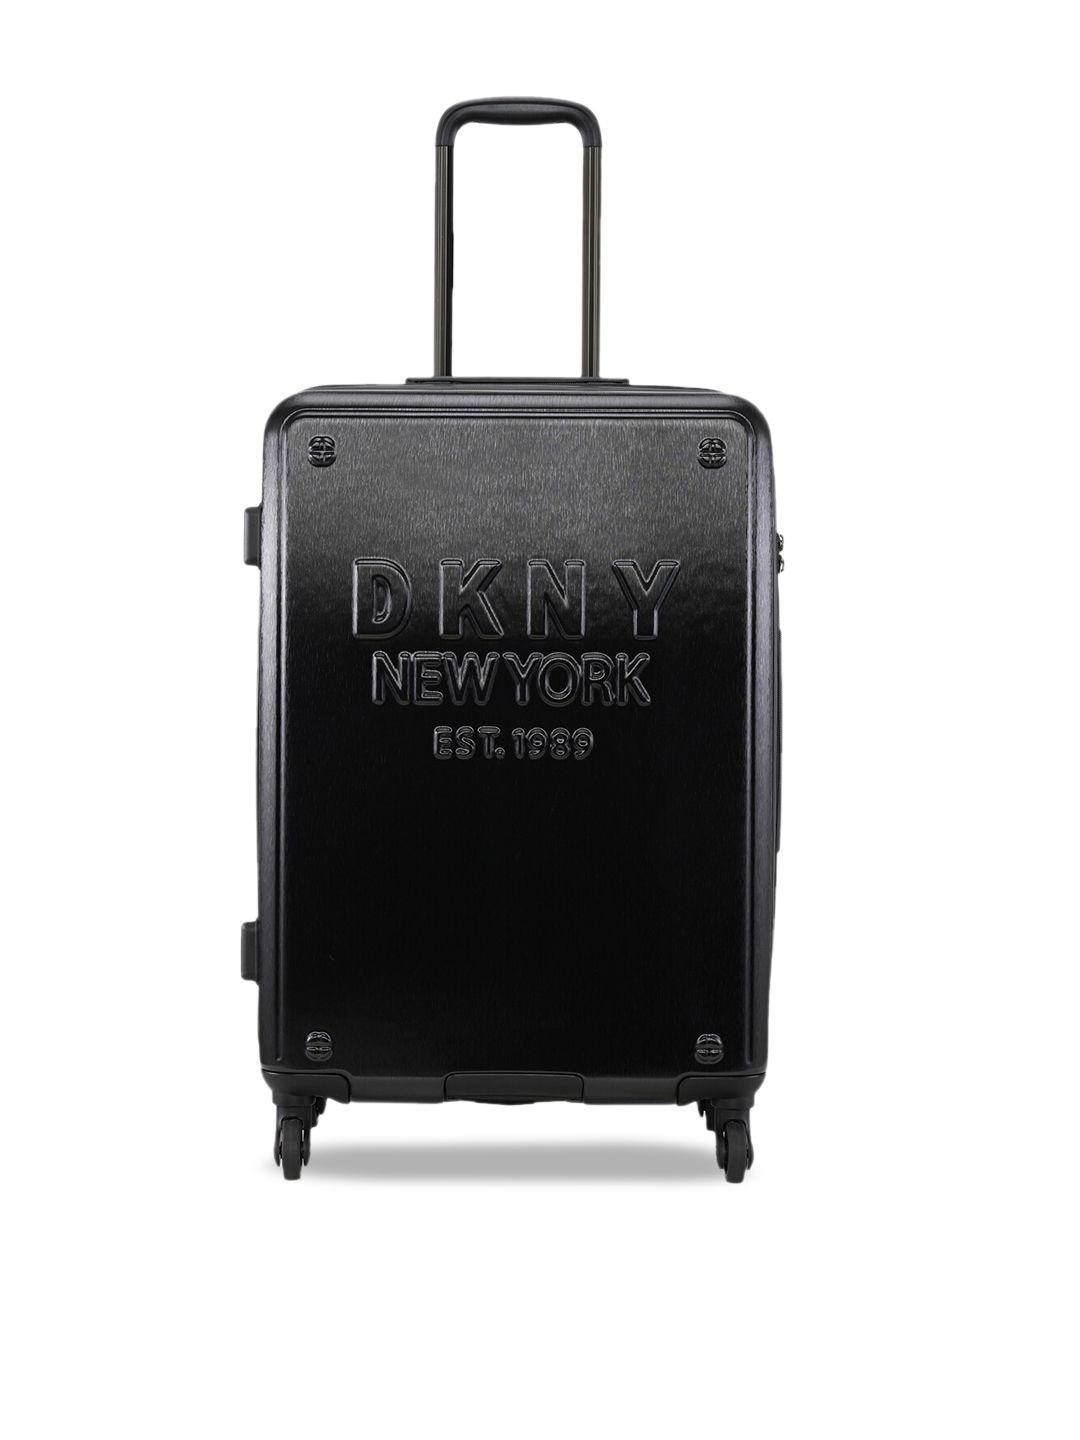 dkny textured hard-sided abs material medium trolley suitcase